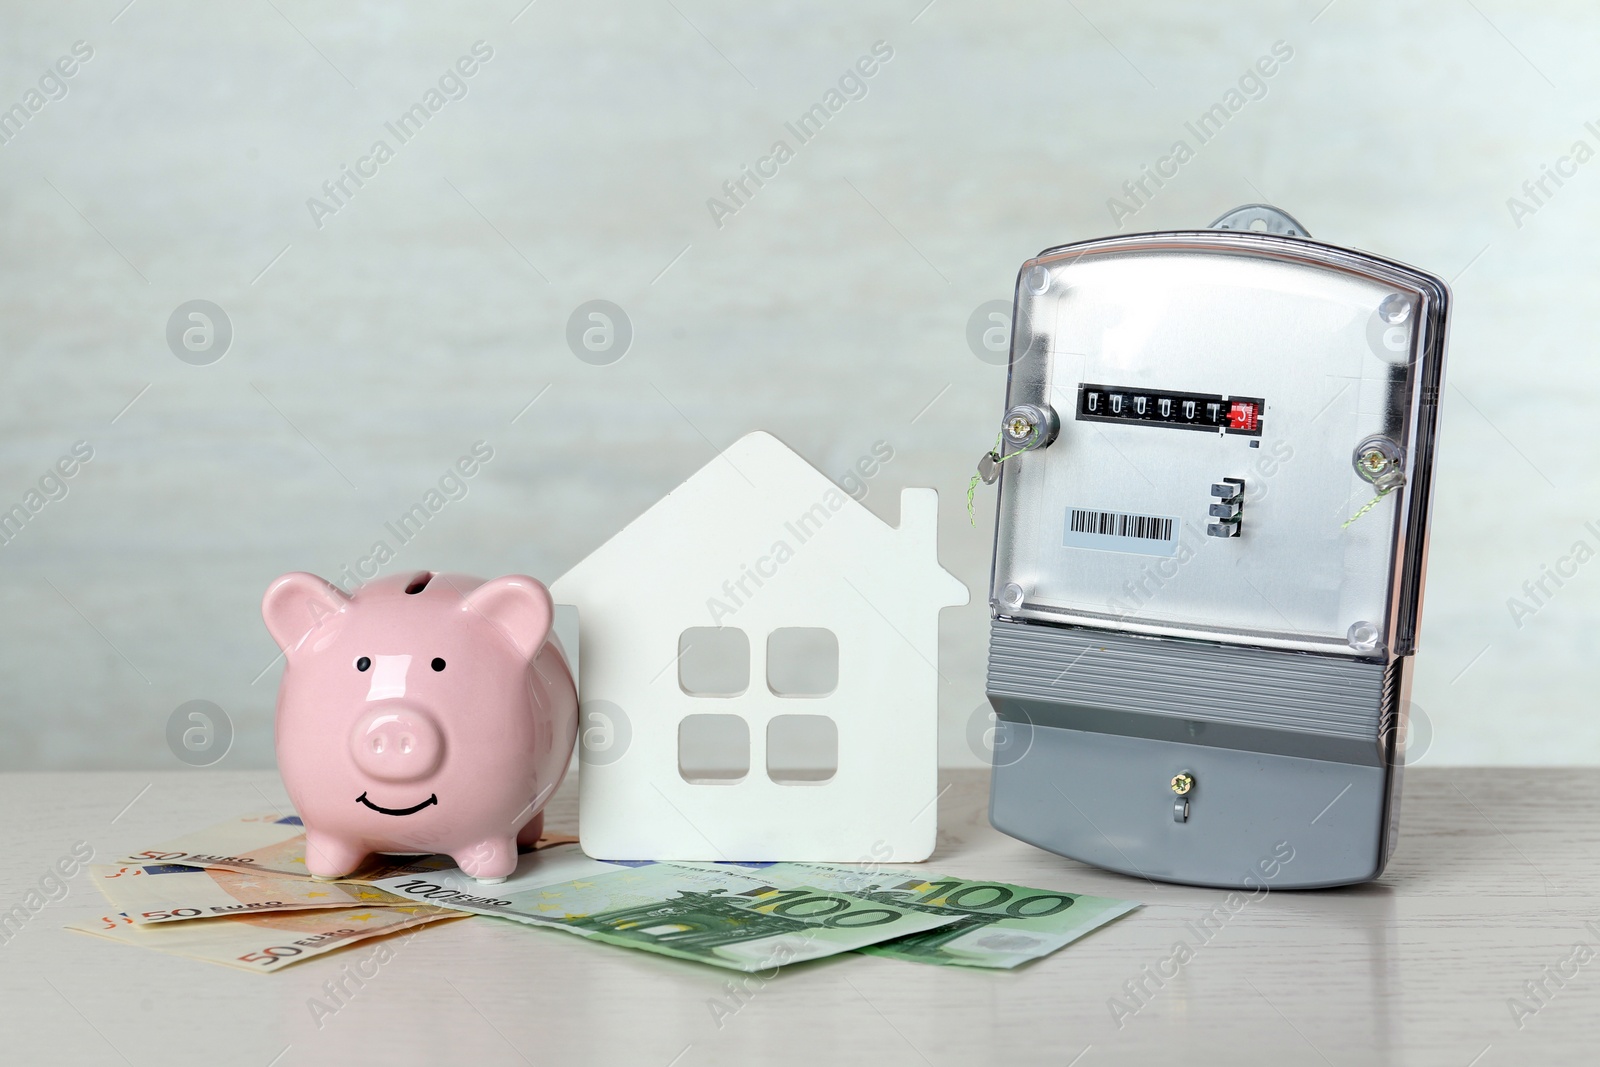 Photo of Electricity meter, piggy bank, house model and euro banknotes on white wooden table